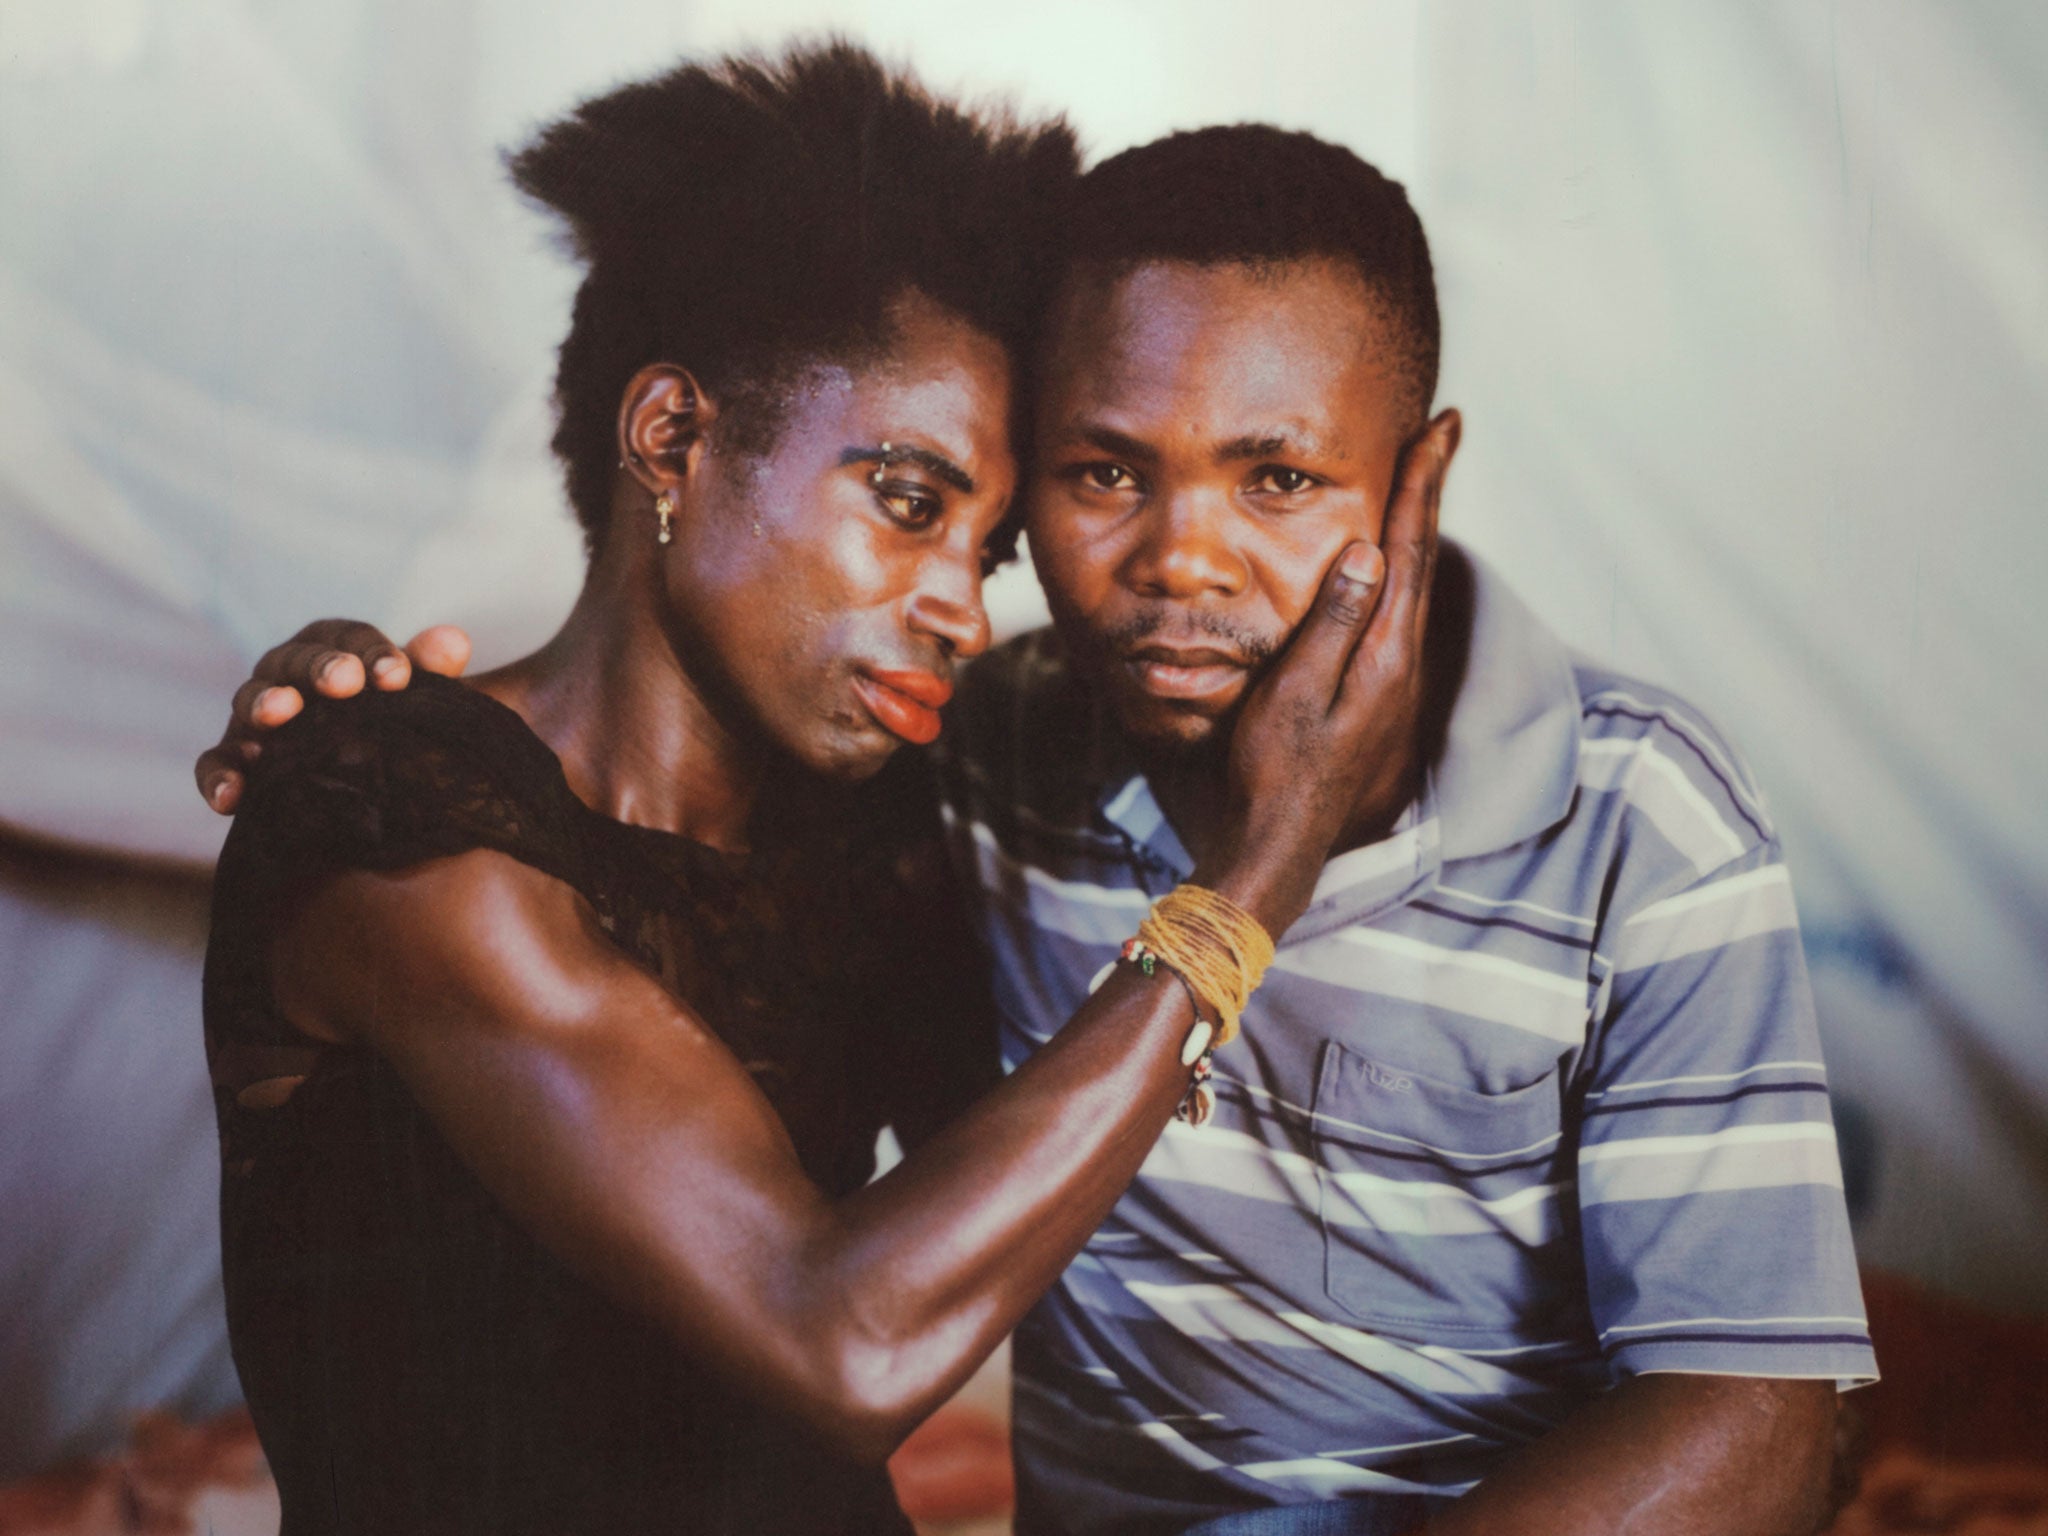 LGBT+ people like Kuteesa and Ernest face life-threatening stigma in Africa